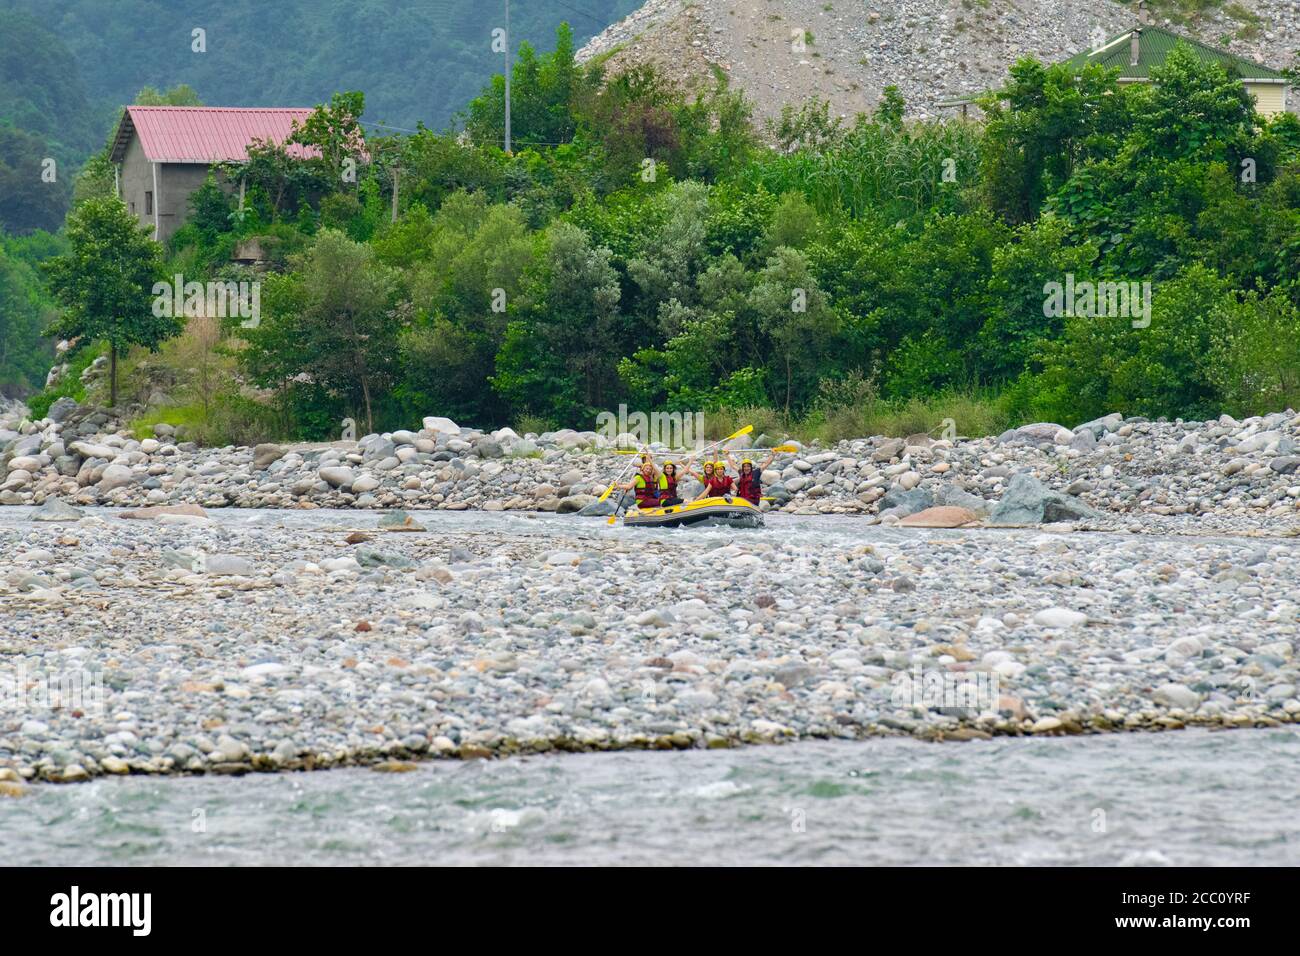 Rize, TURKEY - 2016: Rafting on a mountain river. Waves with spray and foam crashing on the side of the boat, and people rowing oars. Extrem sport. Stock Photo